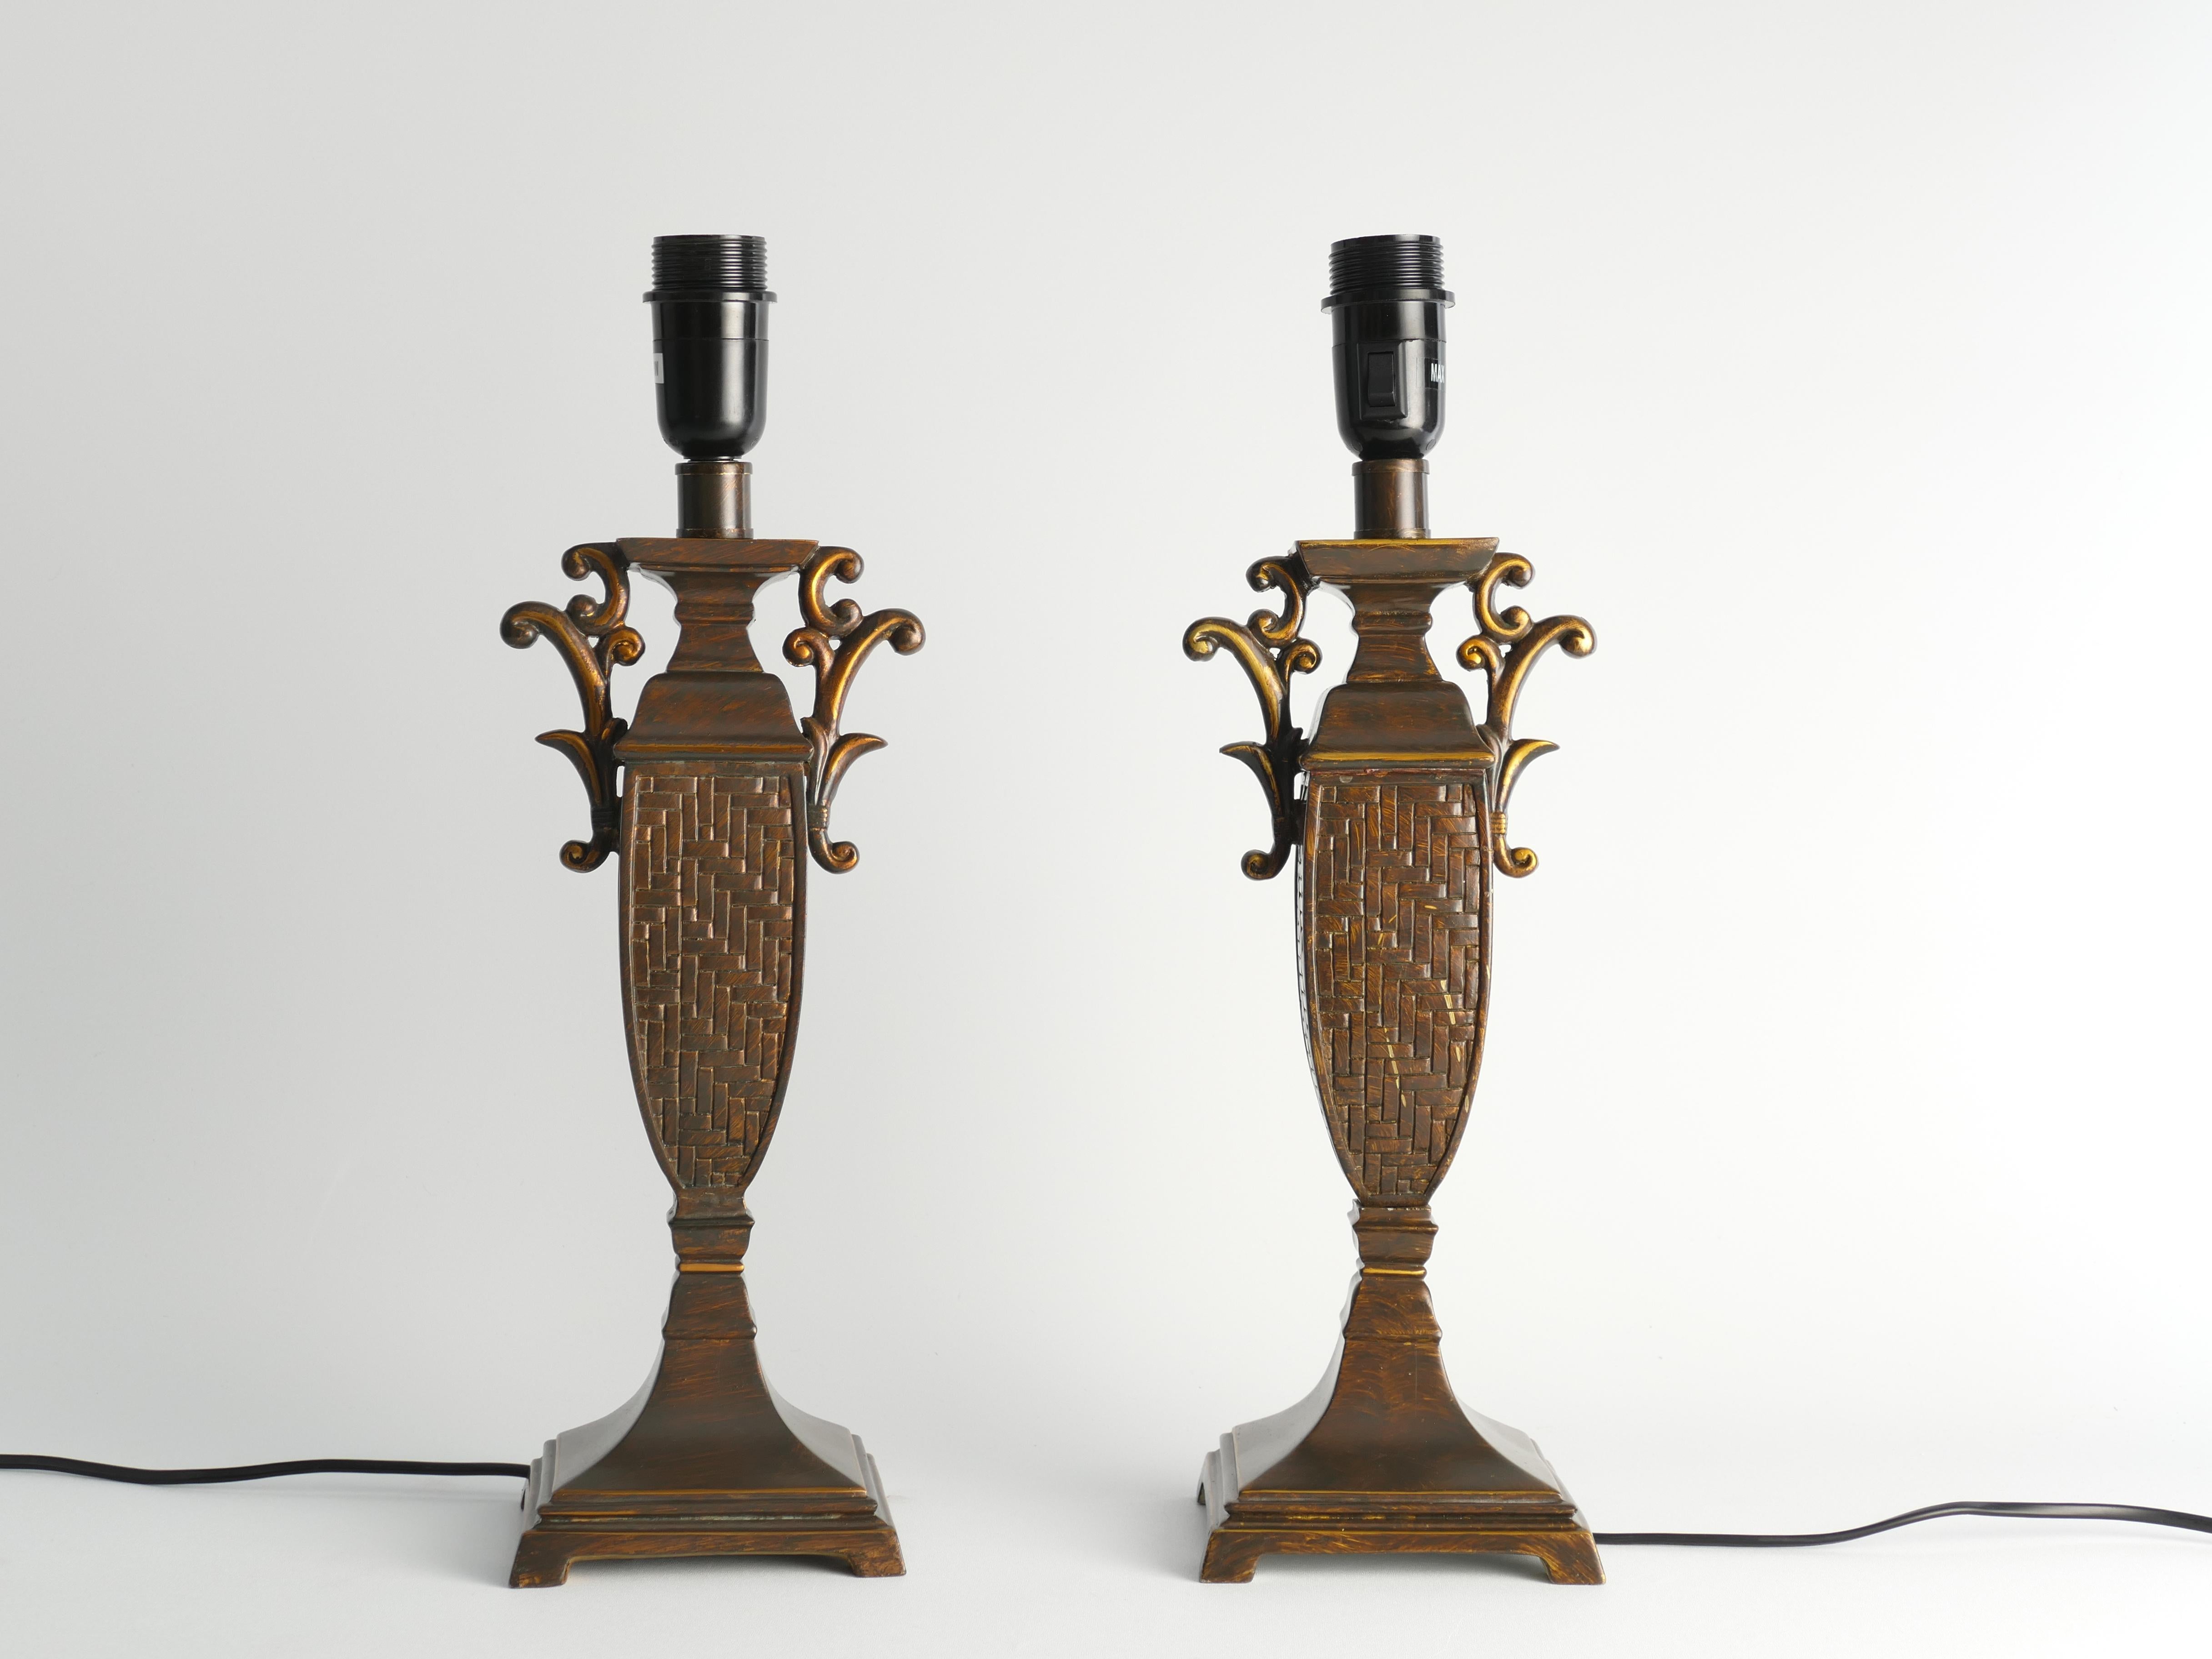 This is a pair of fantastic chinoiserie vintage table lamps from the 1980s. The exact material is uncertain, but they are likely made of artificial plaster. The lamps have an amphora shape, reminiscent of ancient Greek or Roman vessels, with a